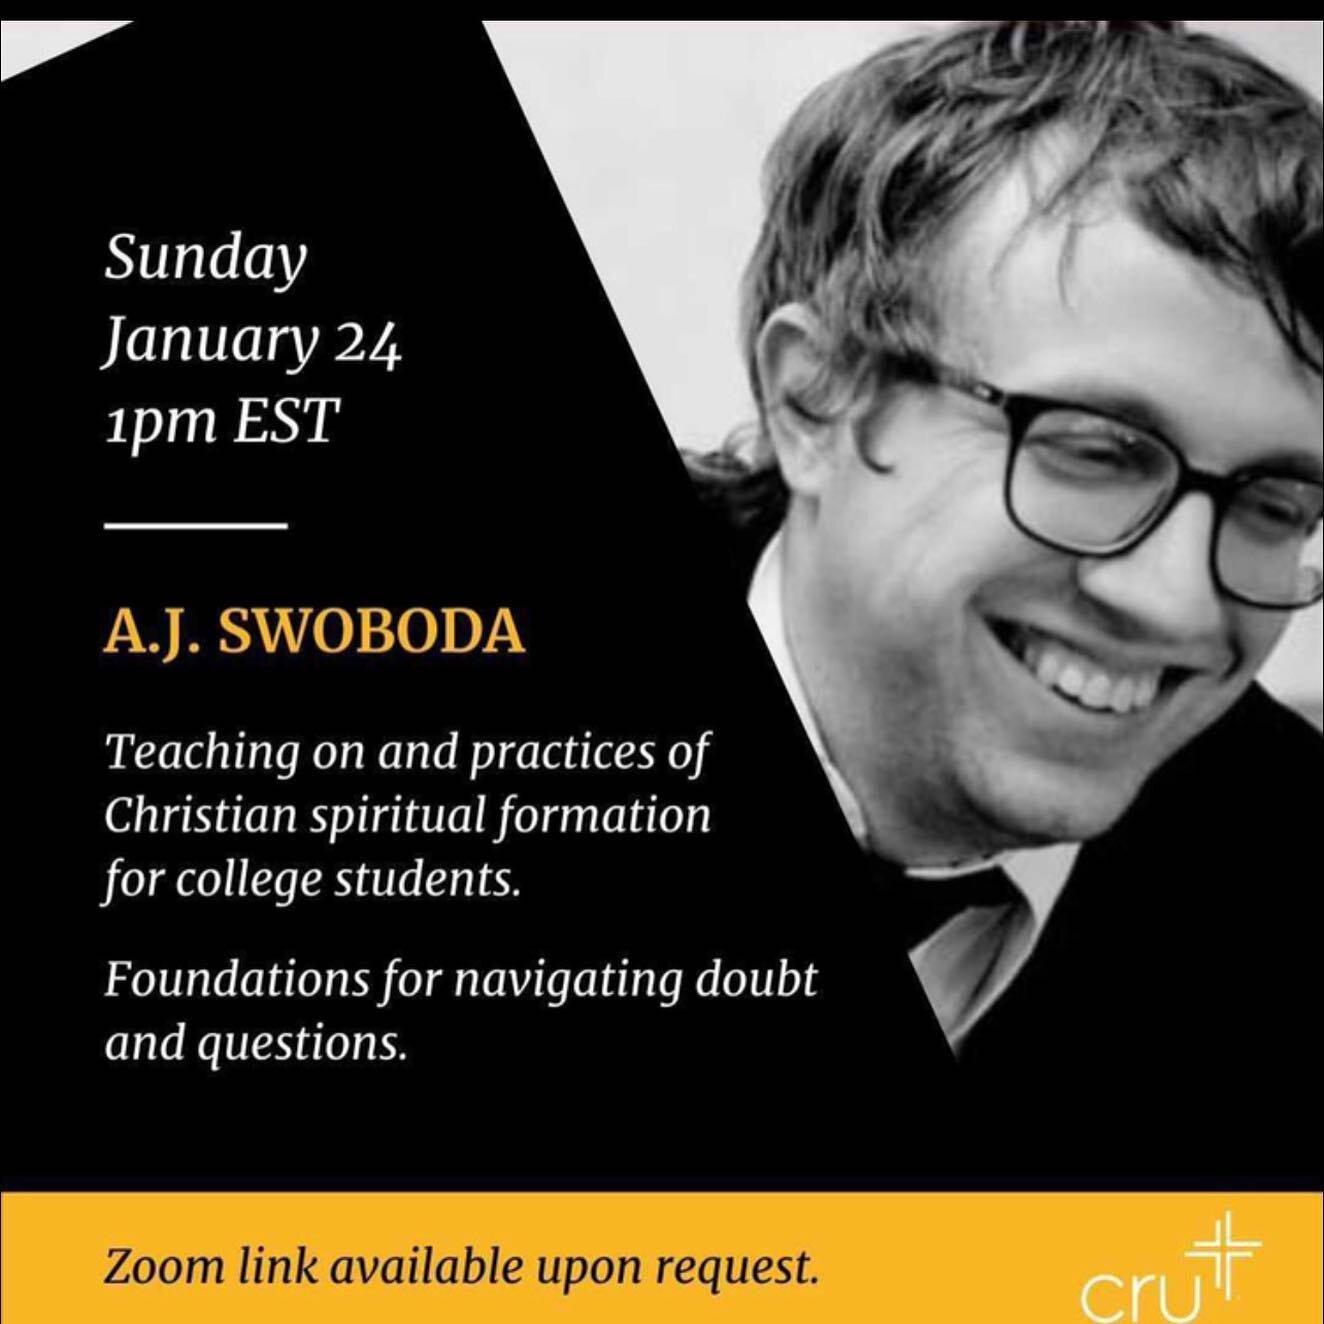 Hey Epic Friends!! Praying you all had a great break and semi enjoying J-term classes!  We are excited to see you all soon! Wanted to share with you about this awesome events we are having where we will get to hear from A.J. Swoboda all the way from 